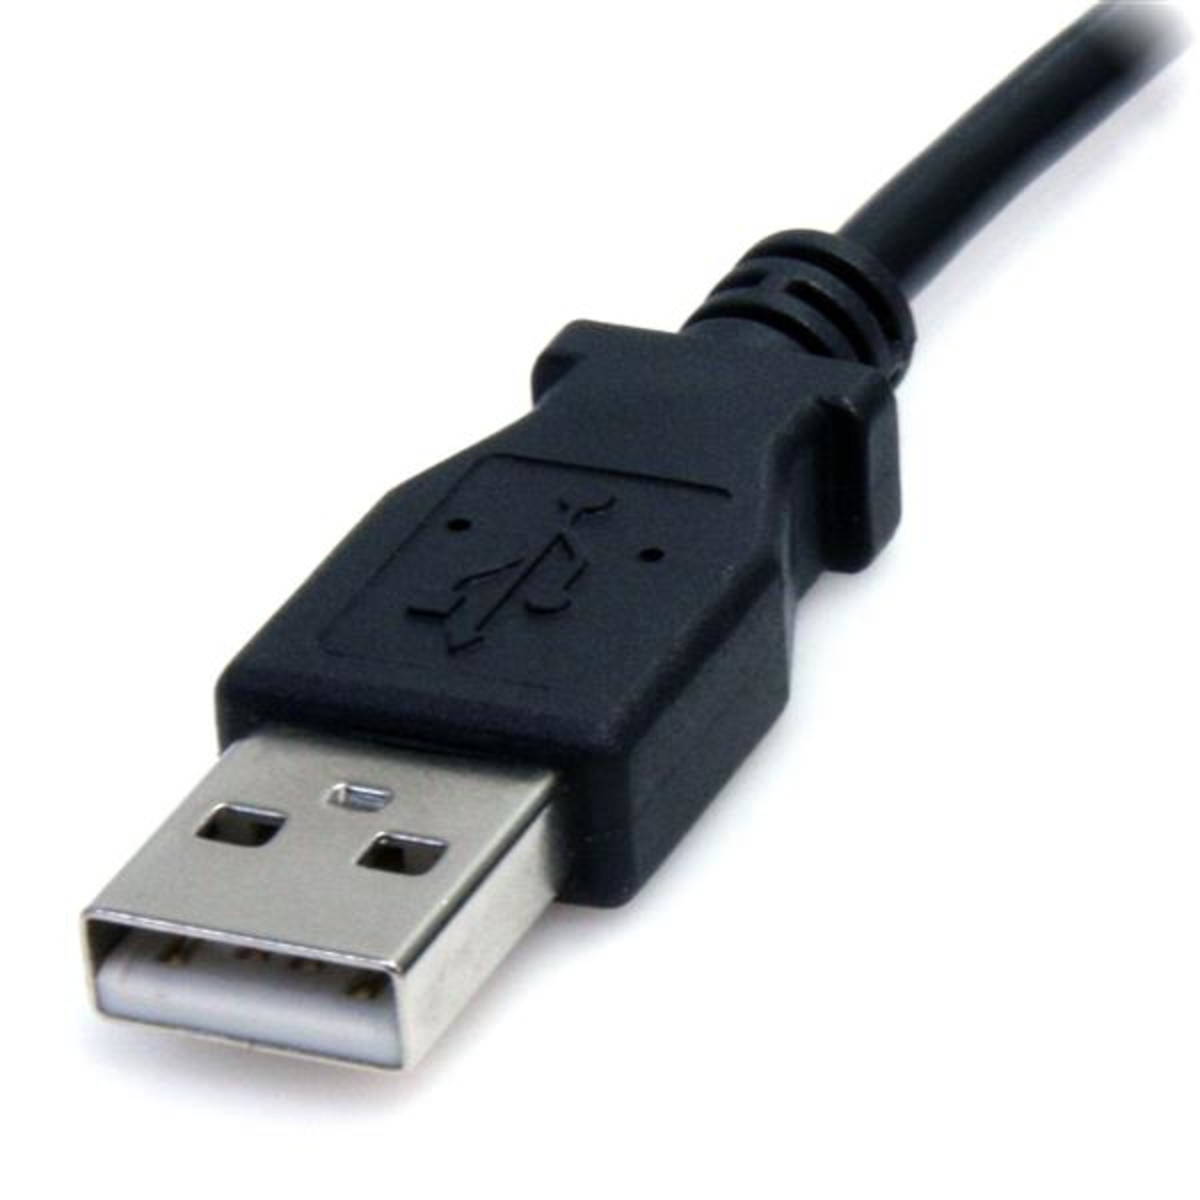 2m USB to Type M Barrel Cable